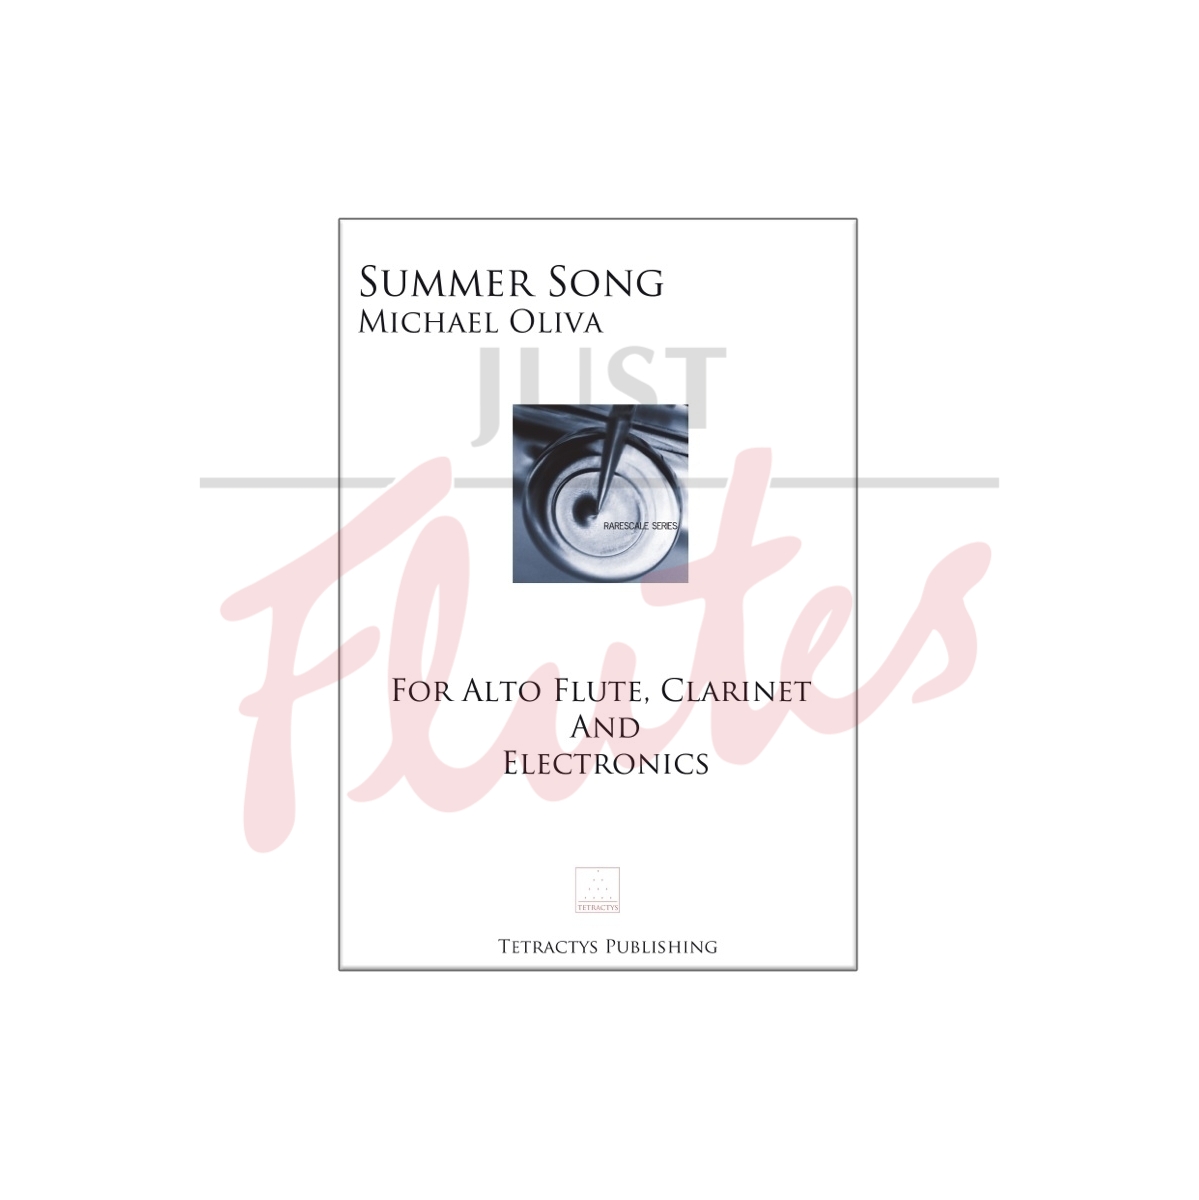 Summer Song for Alto Flute, Clarinet and Electronics